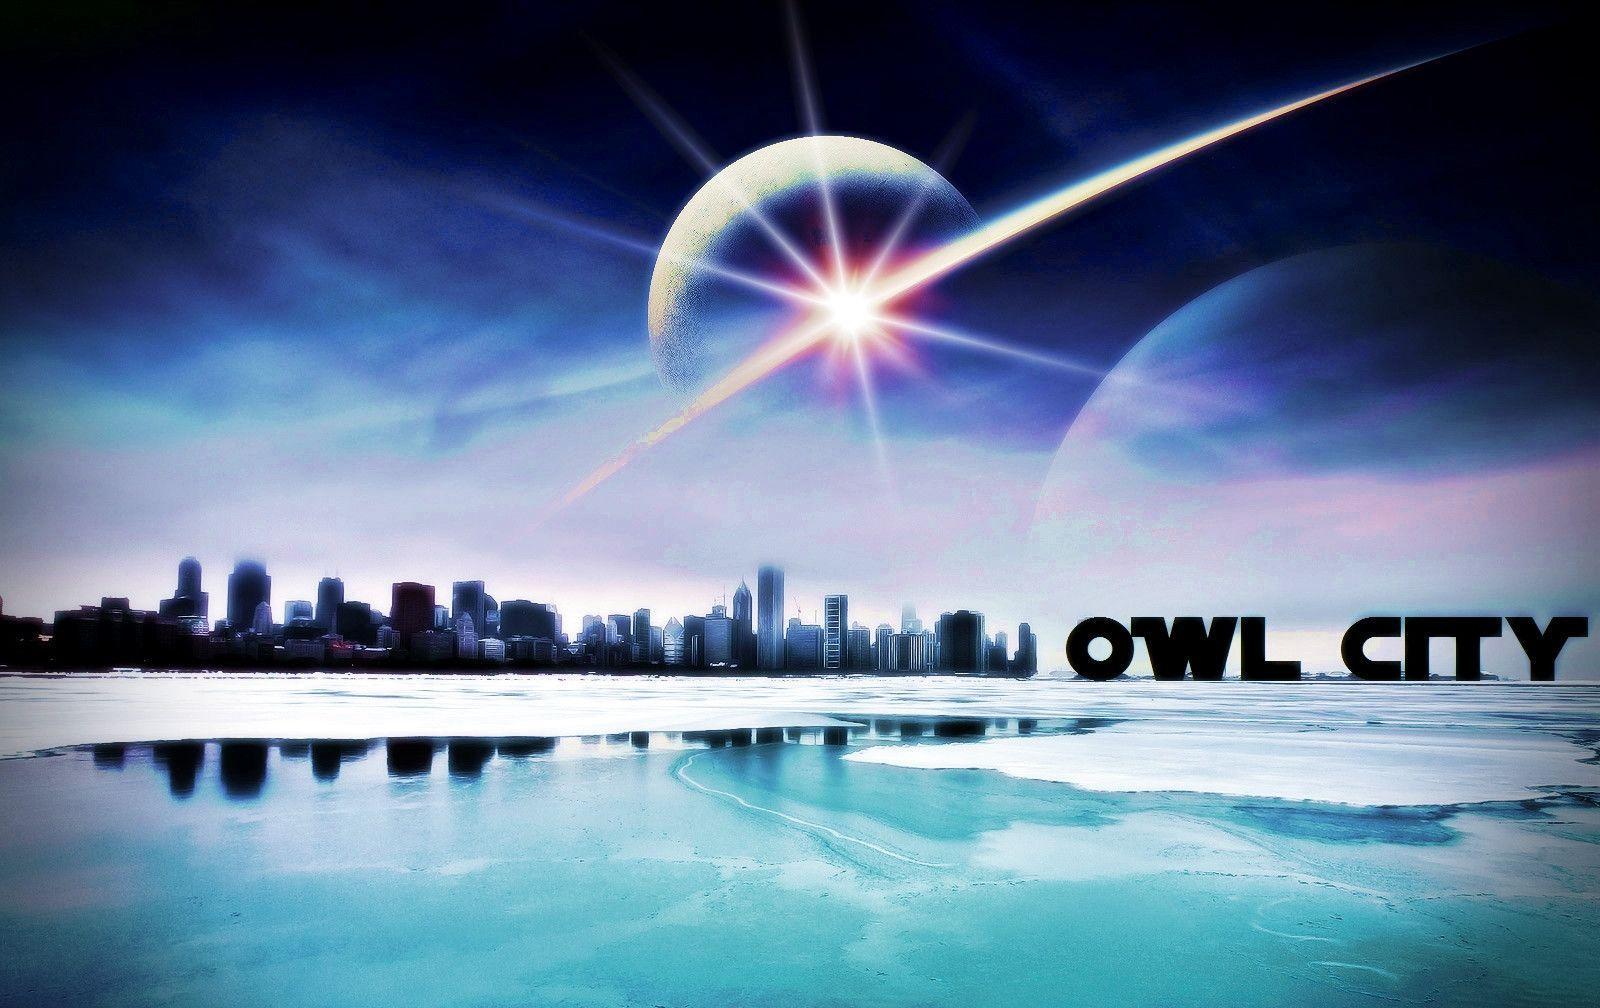 owl city wallpaper by supermario djwqyw - Image And Wallpaper